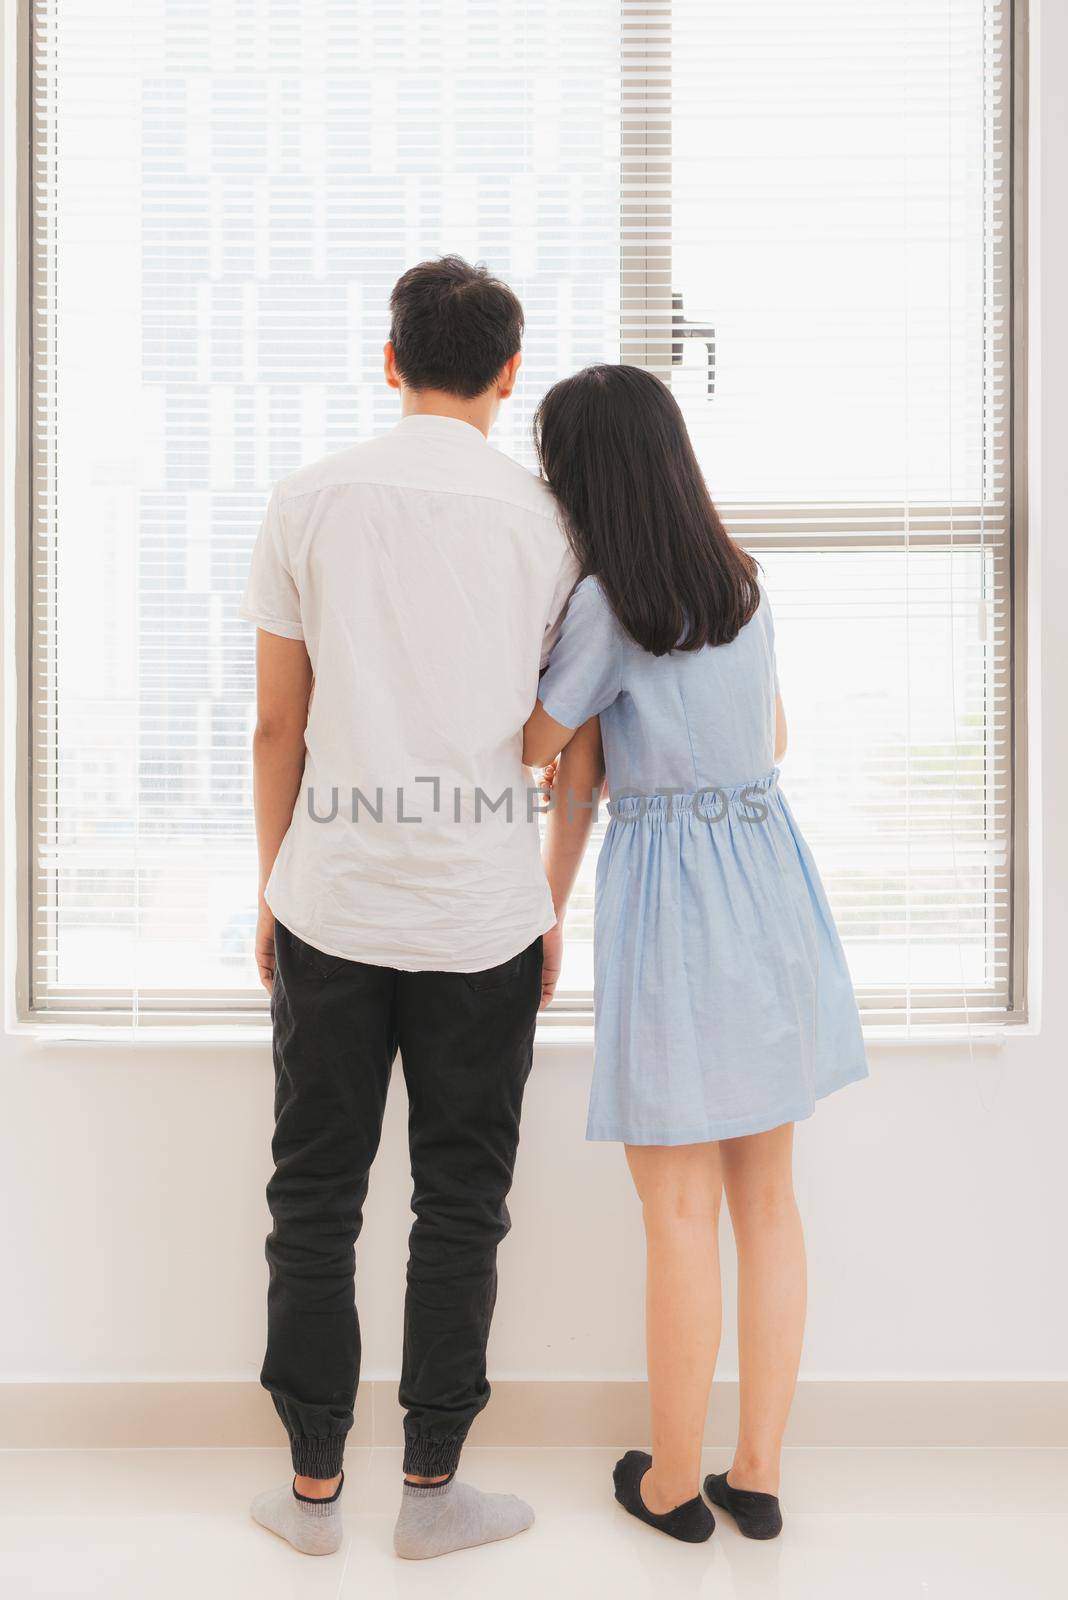 Couple in love. Young couple standing together